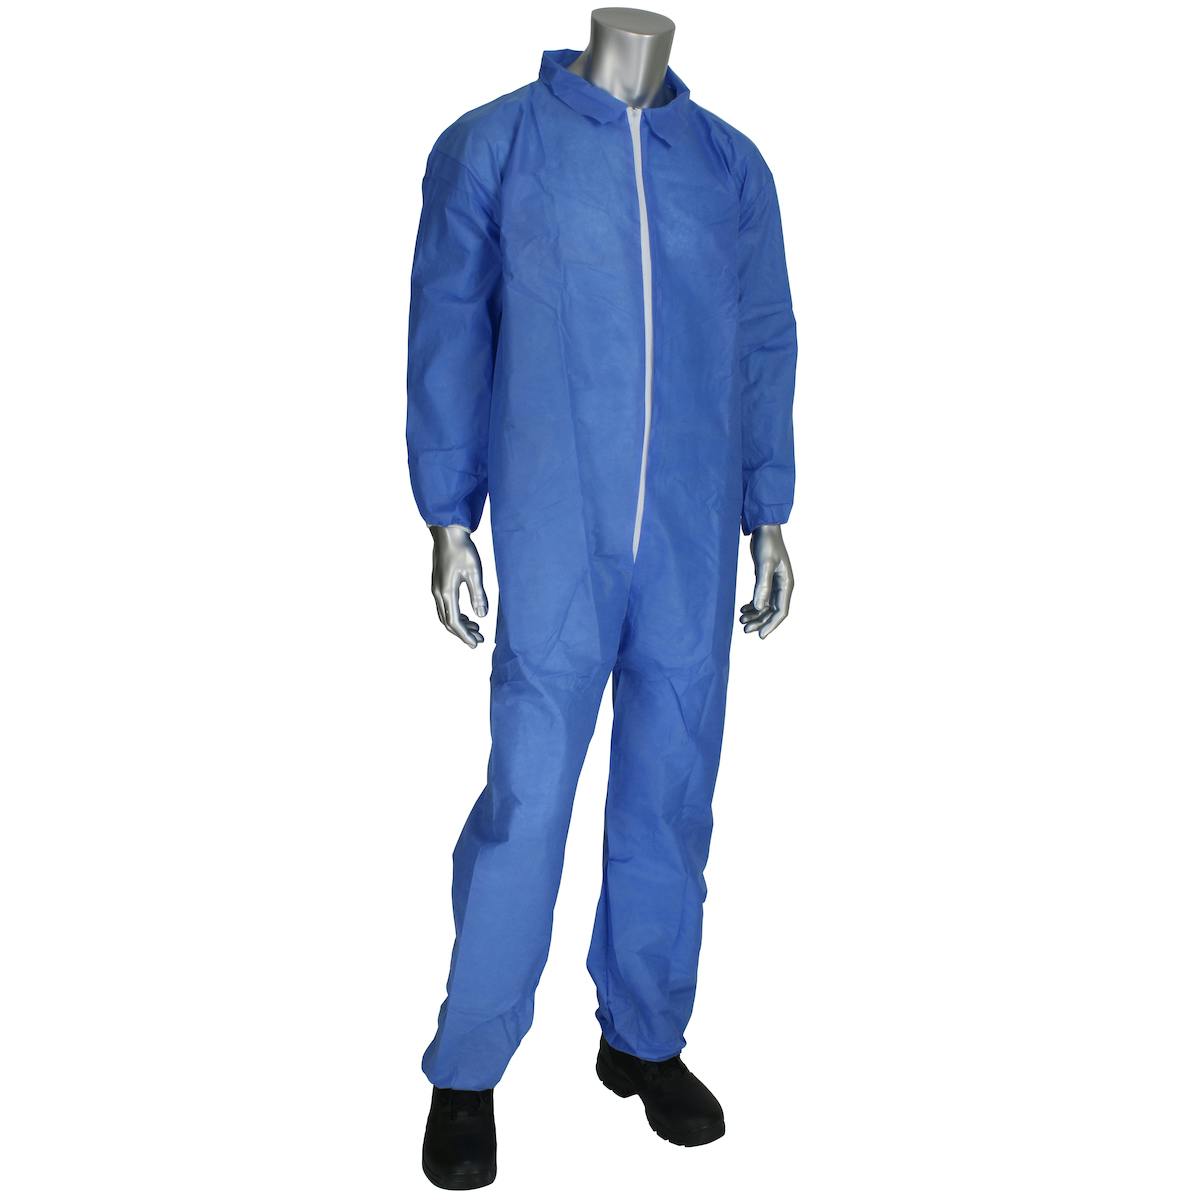 SMS - Coverall with Elastic Wrist & Ankle 42 gsm, Blue (BC3852)